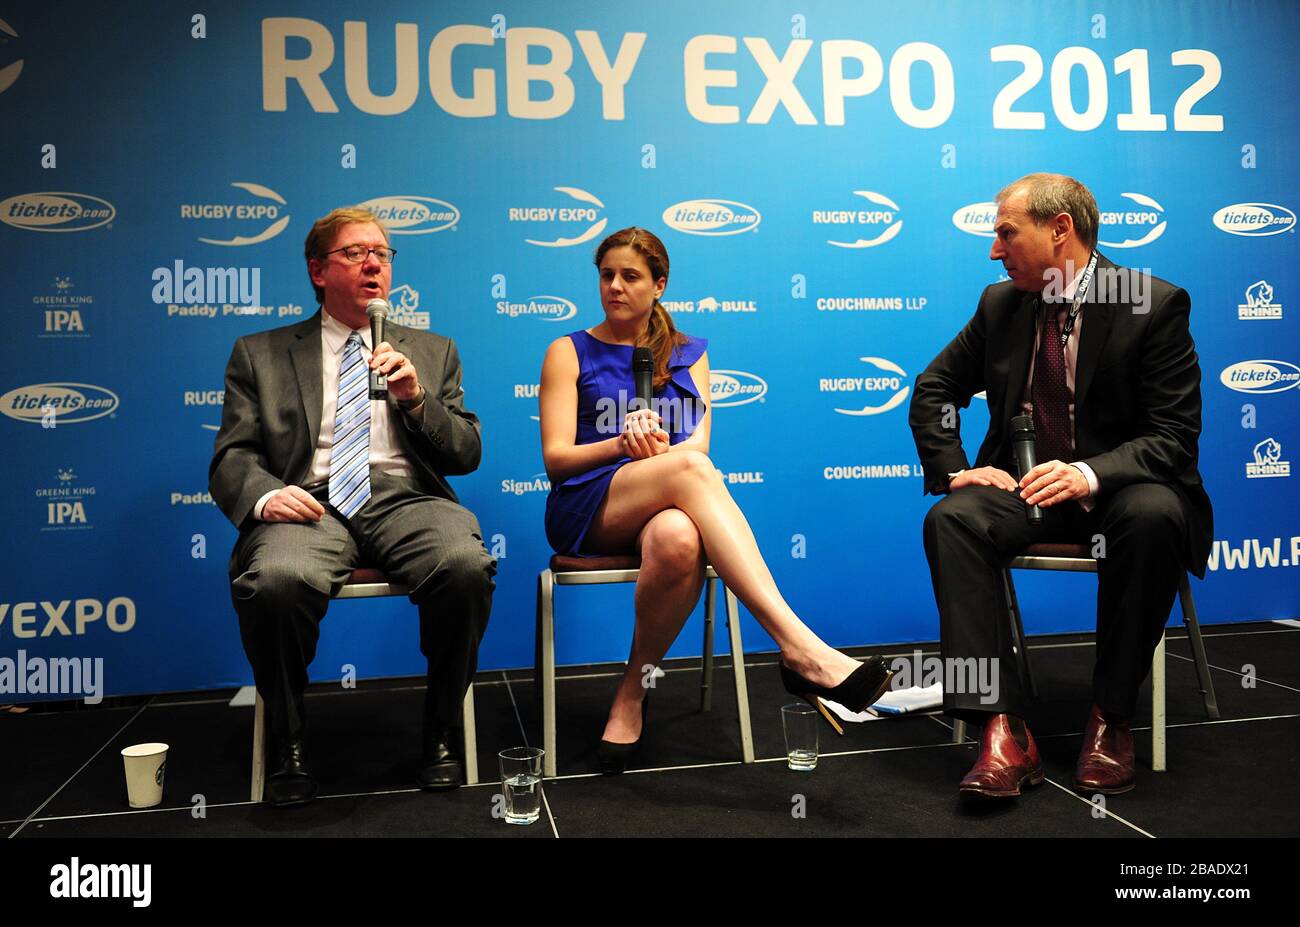 Managing Director of International Business at Tickets.com Derek Palmer (left) and Vice President of Ticket Sales & Services for the New York Mets Leigh Castergine (centre) speak with Kevin Roberts of Sport Business International (right) during Day One of the Rugby Expo 2012 Stock Photo